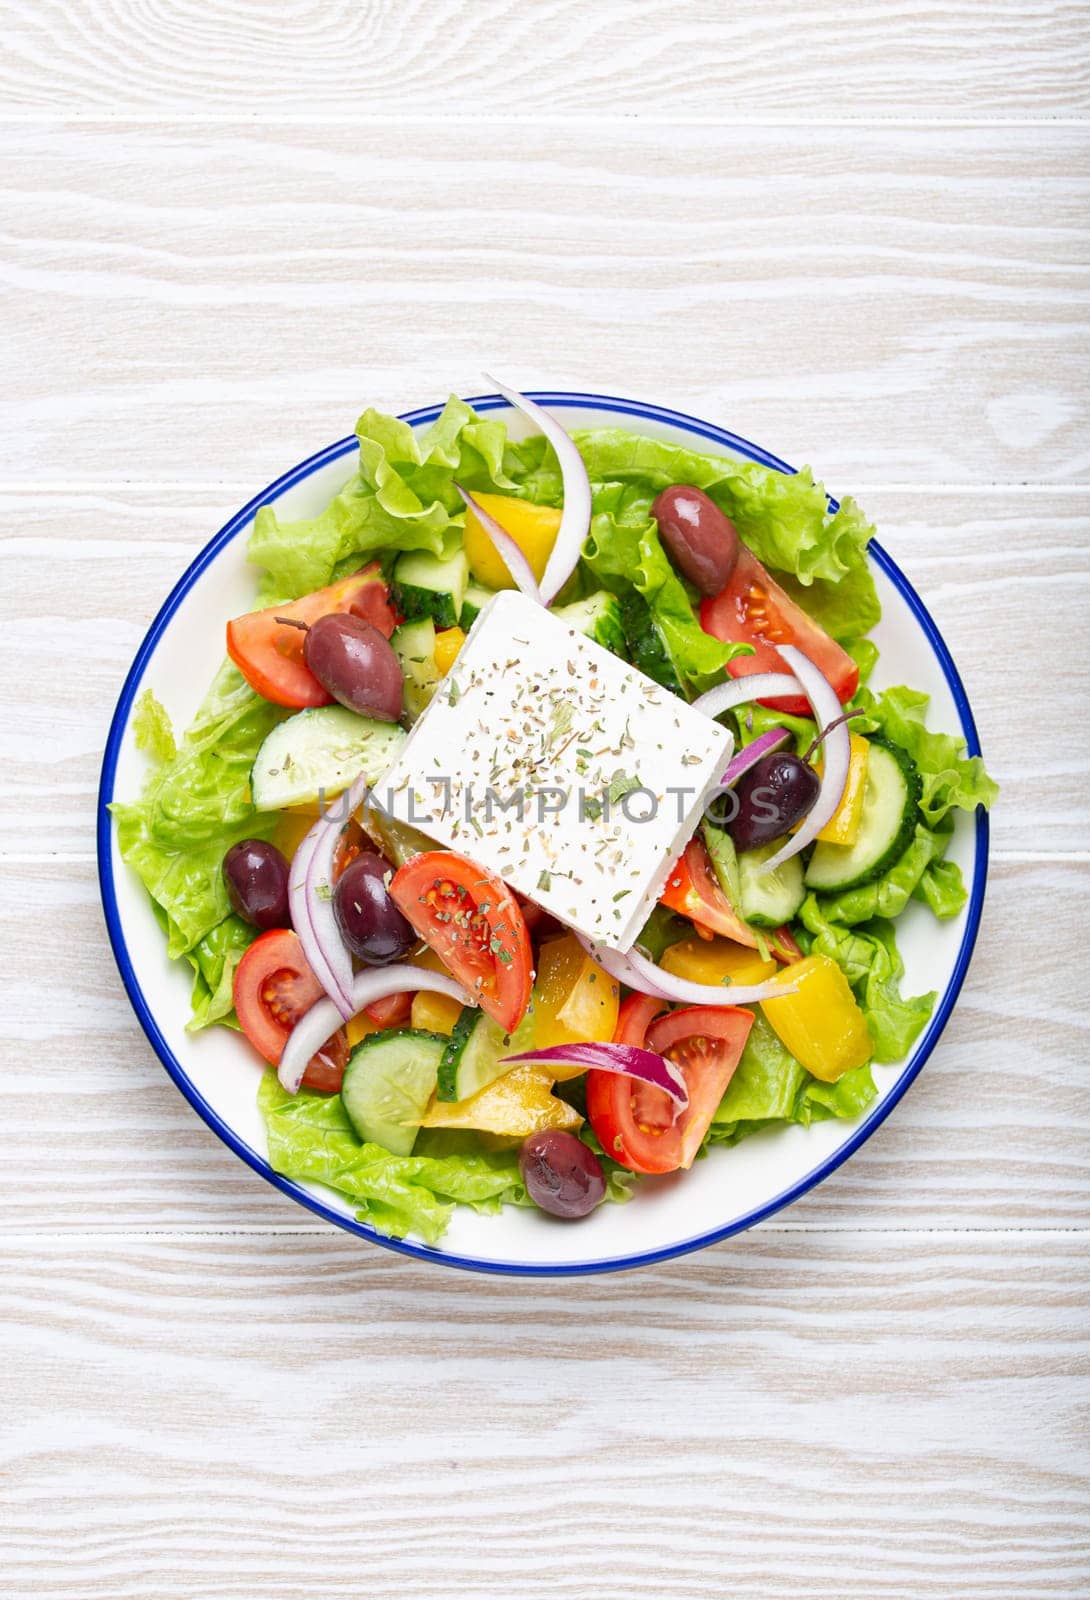 Traditional Greek Salad with Feta Cheese, Tomatoes, Bell Pepper, Cucumbers, Olives, Herbs in white ceramic bowl on White rustic wooden table background top view, Cuisine of Greece by its_al_dente